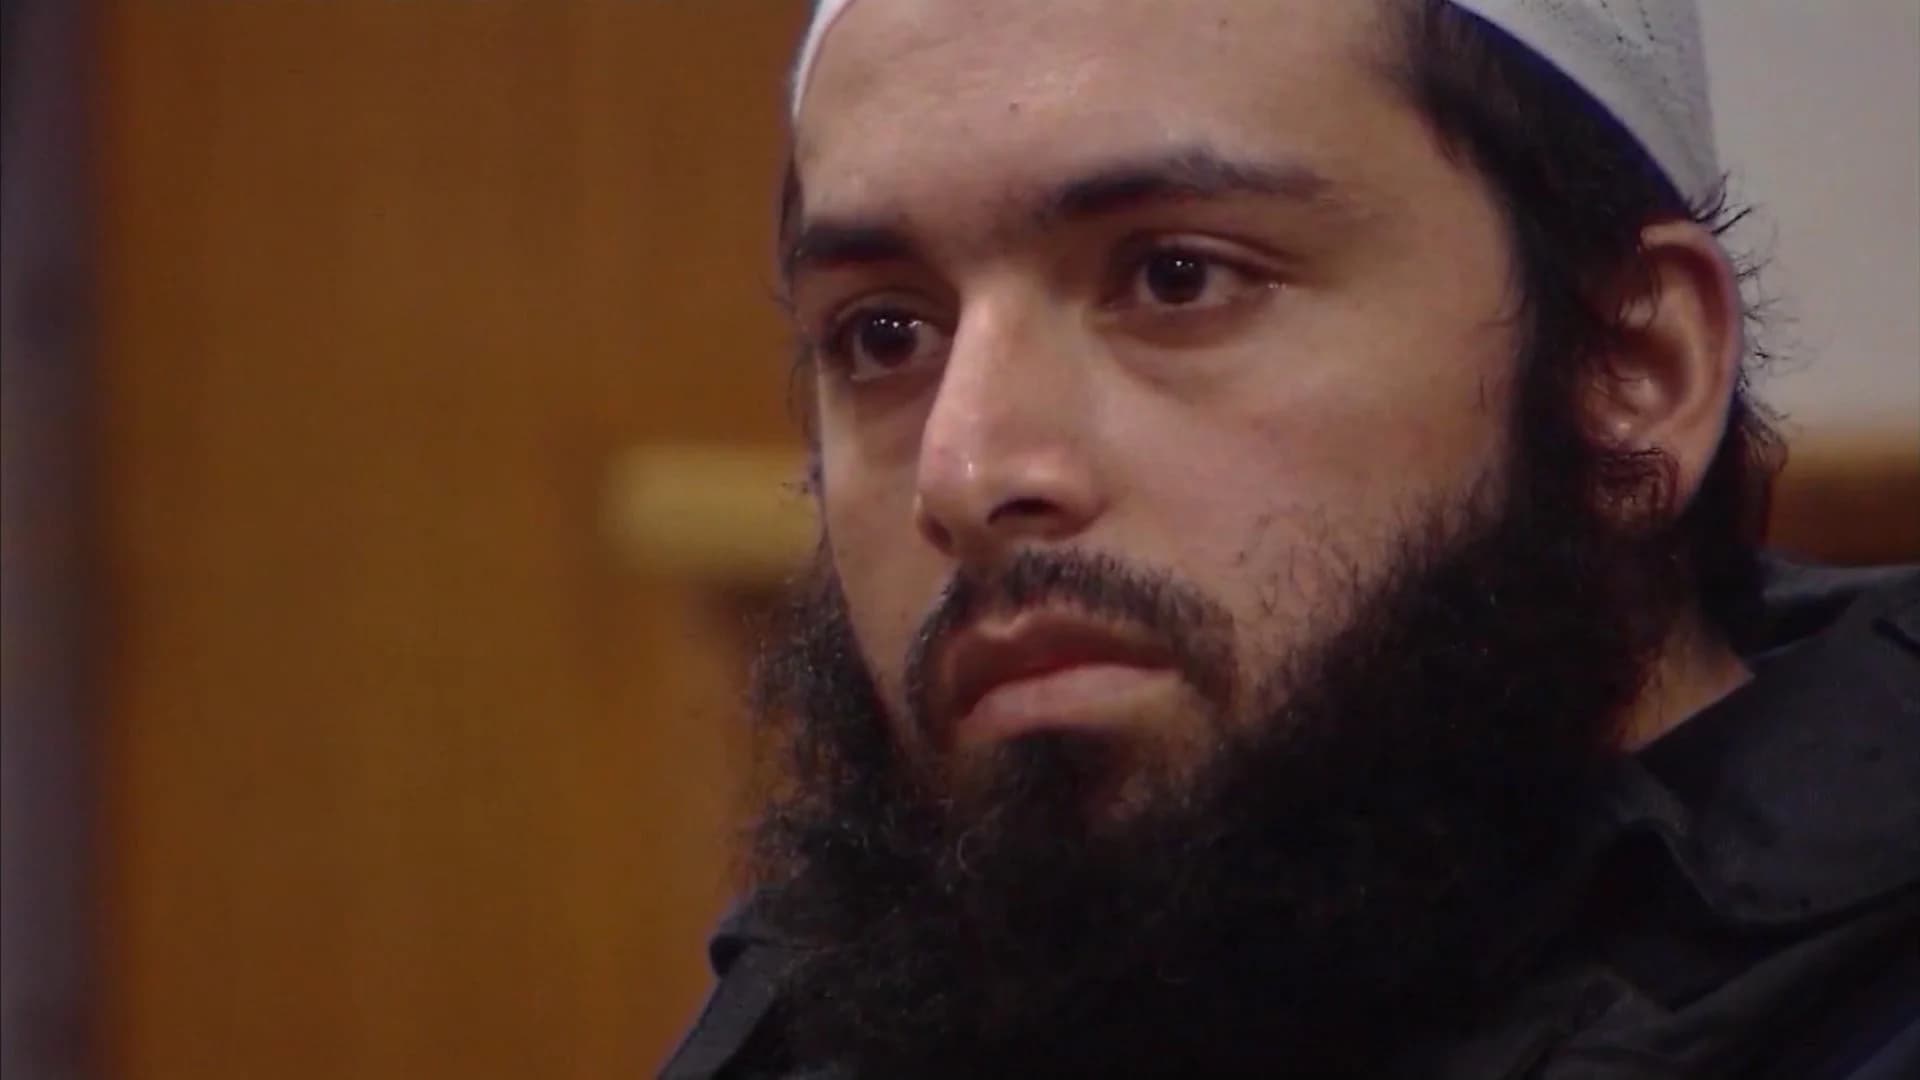 Jury ends 1st day of deliberations in case against bomber without verdict